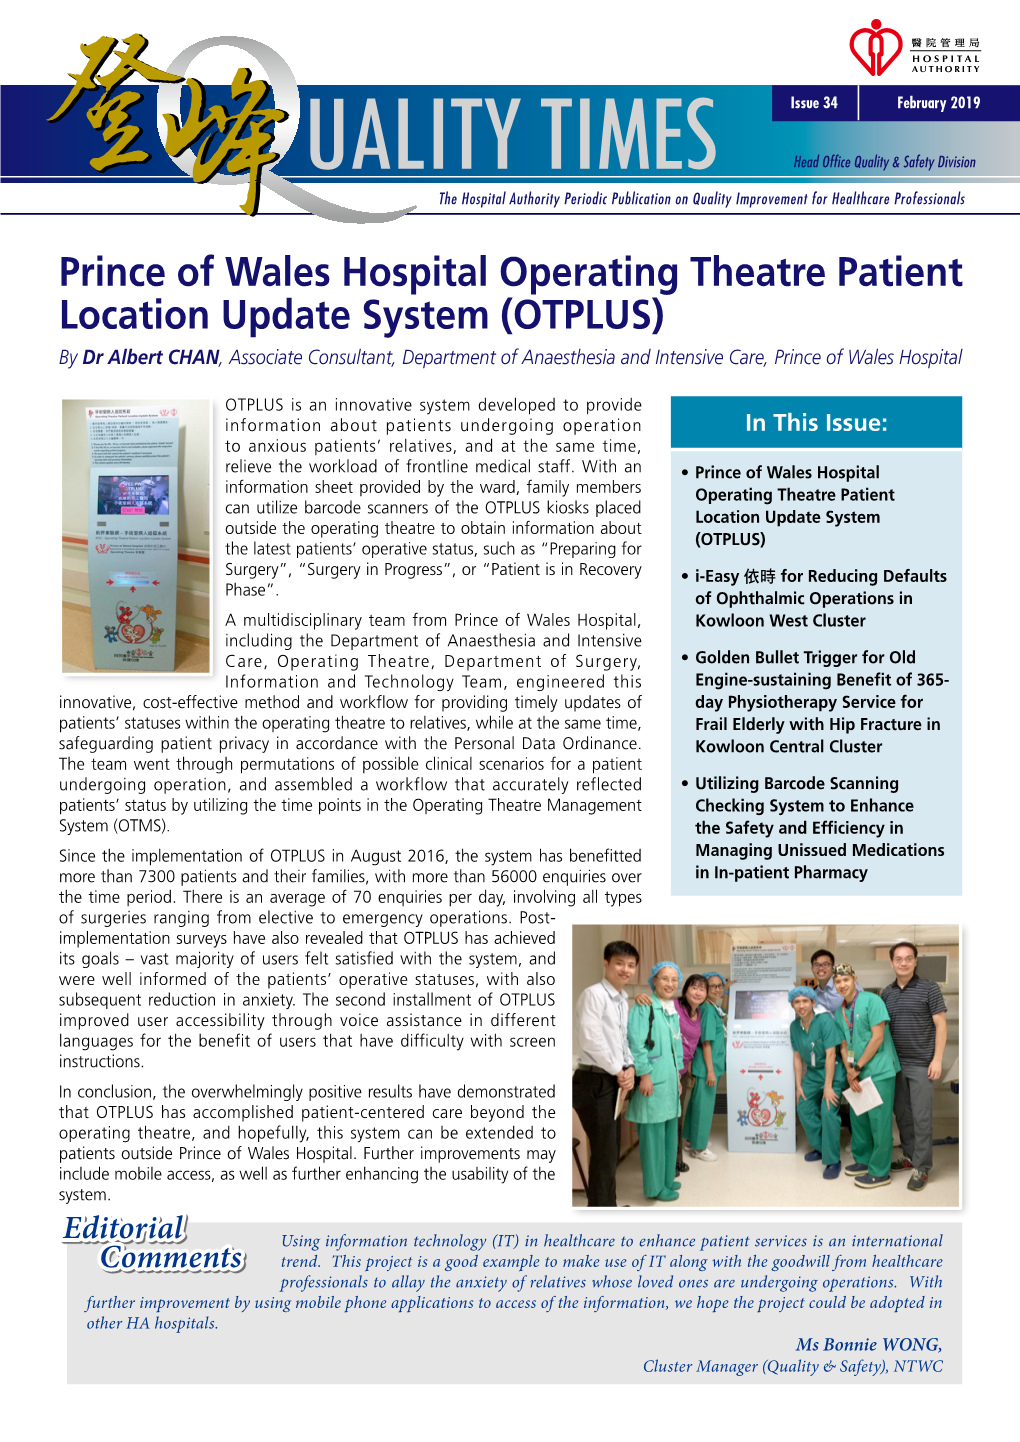 Prince of Wales Hospital Operating Theatre Patient Location Update